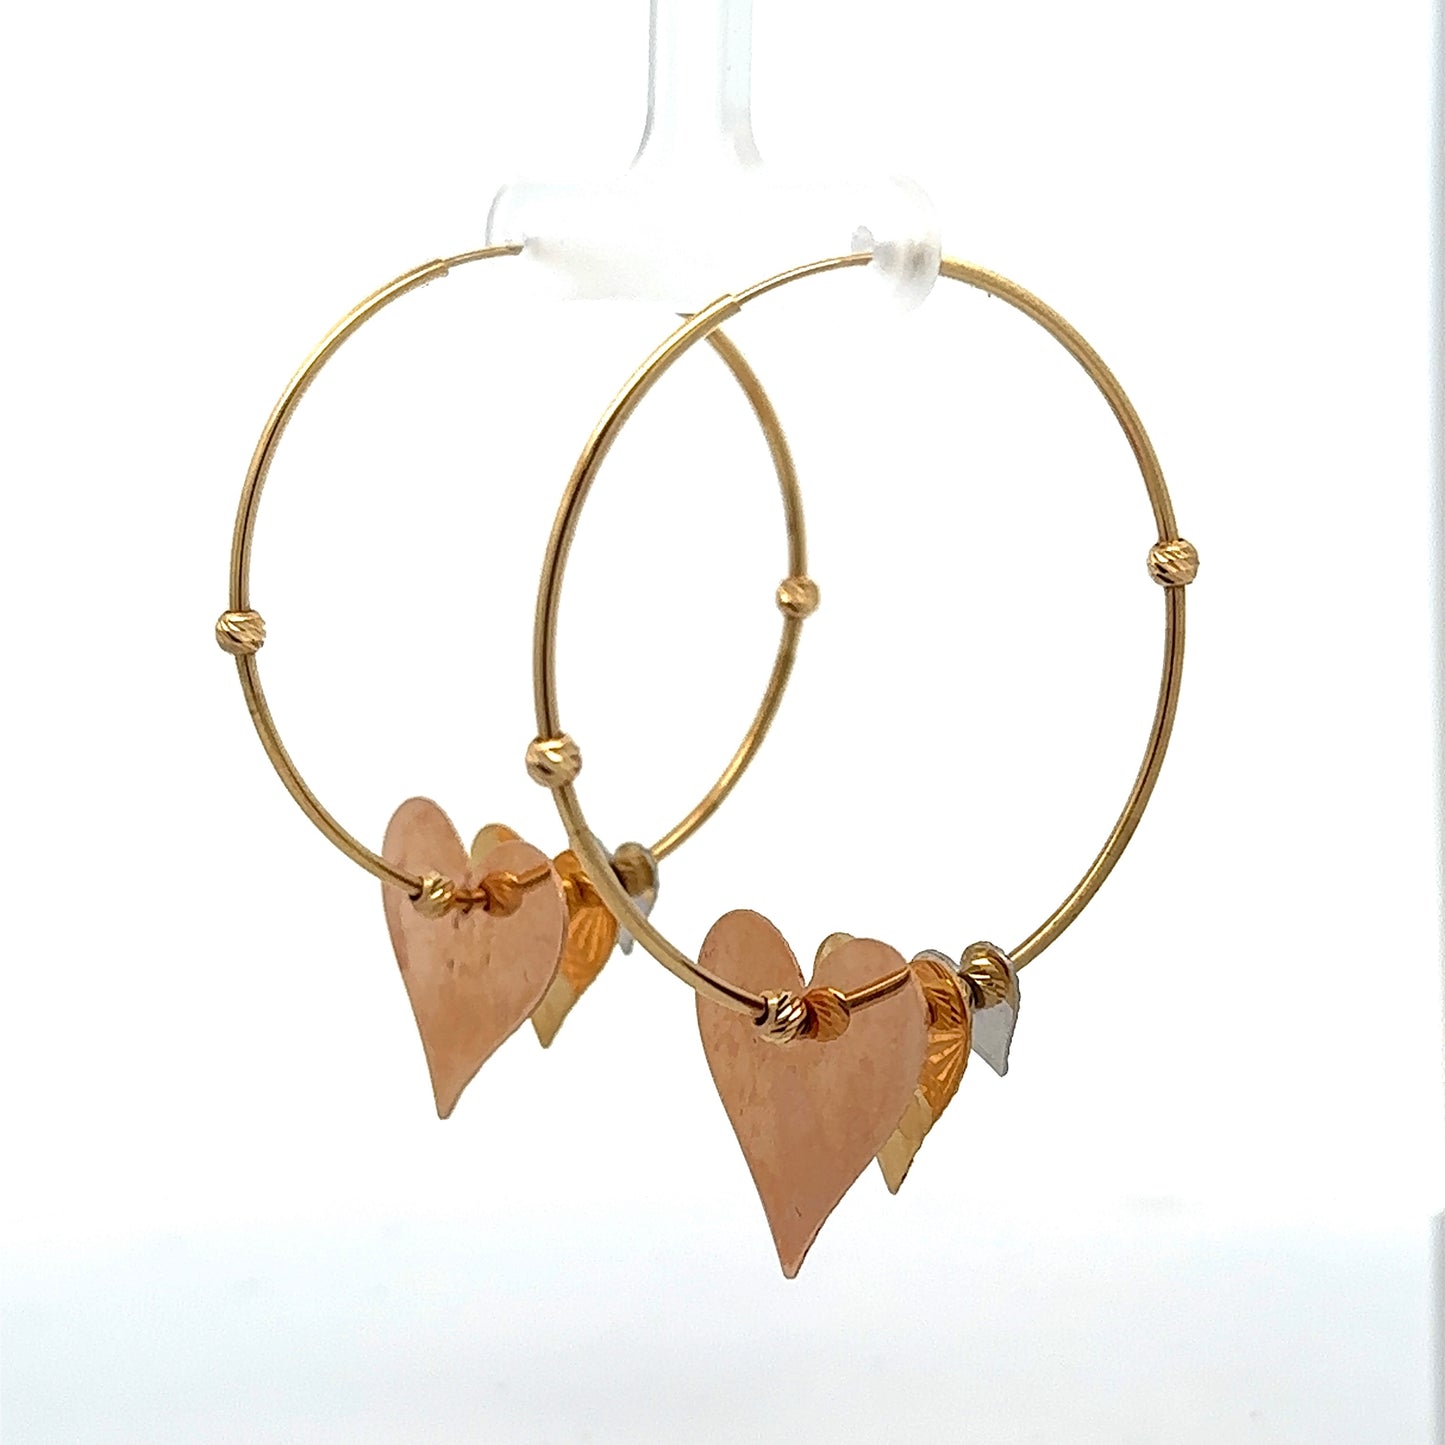 Diagonal view of yellow gold hoops with hanging hearts